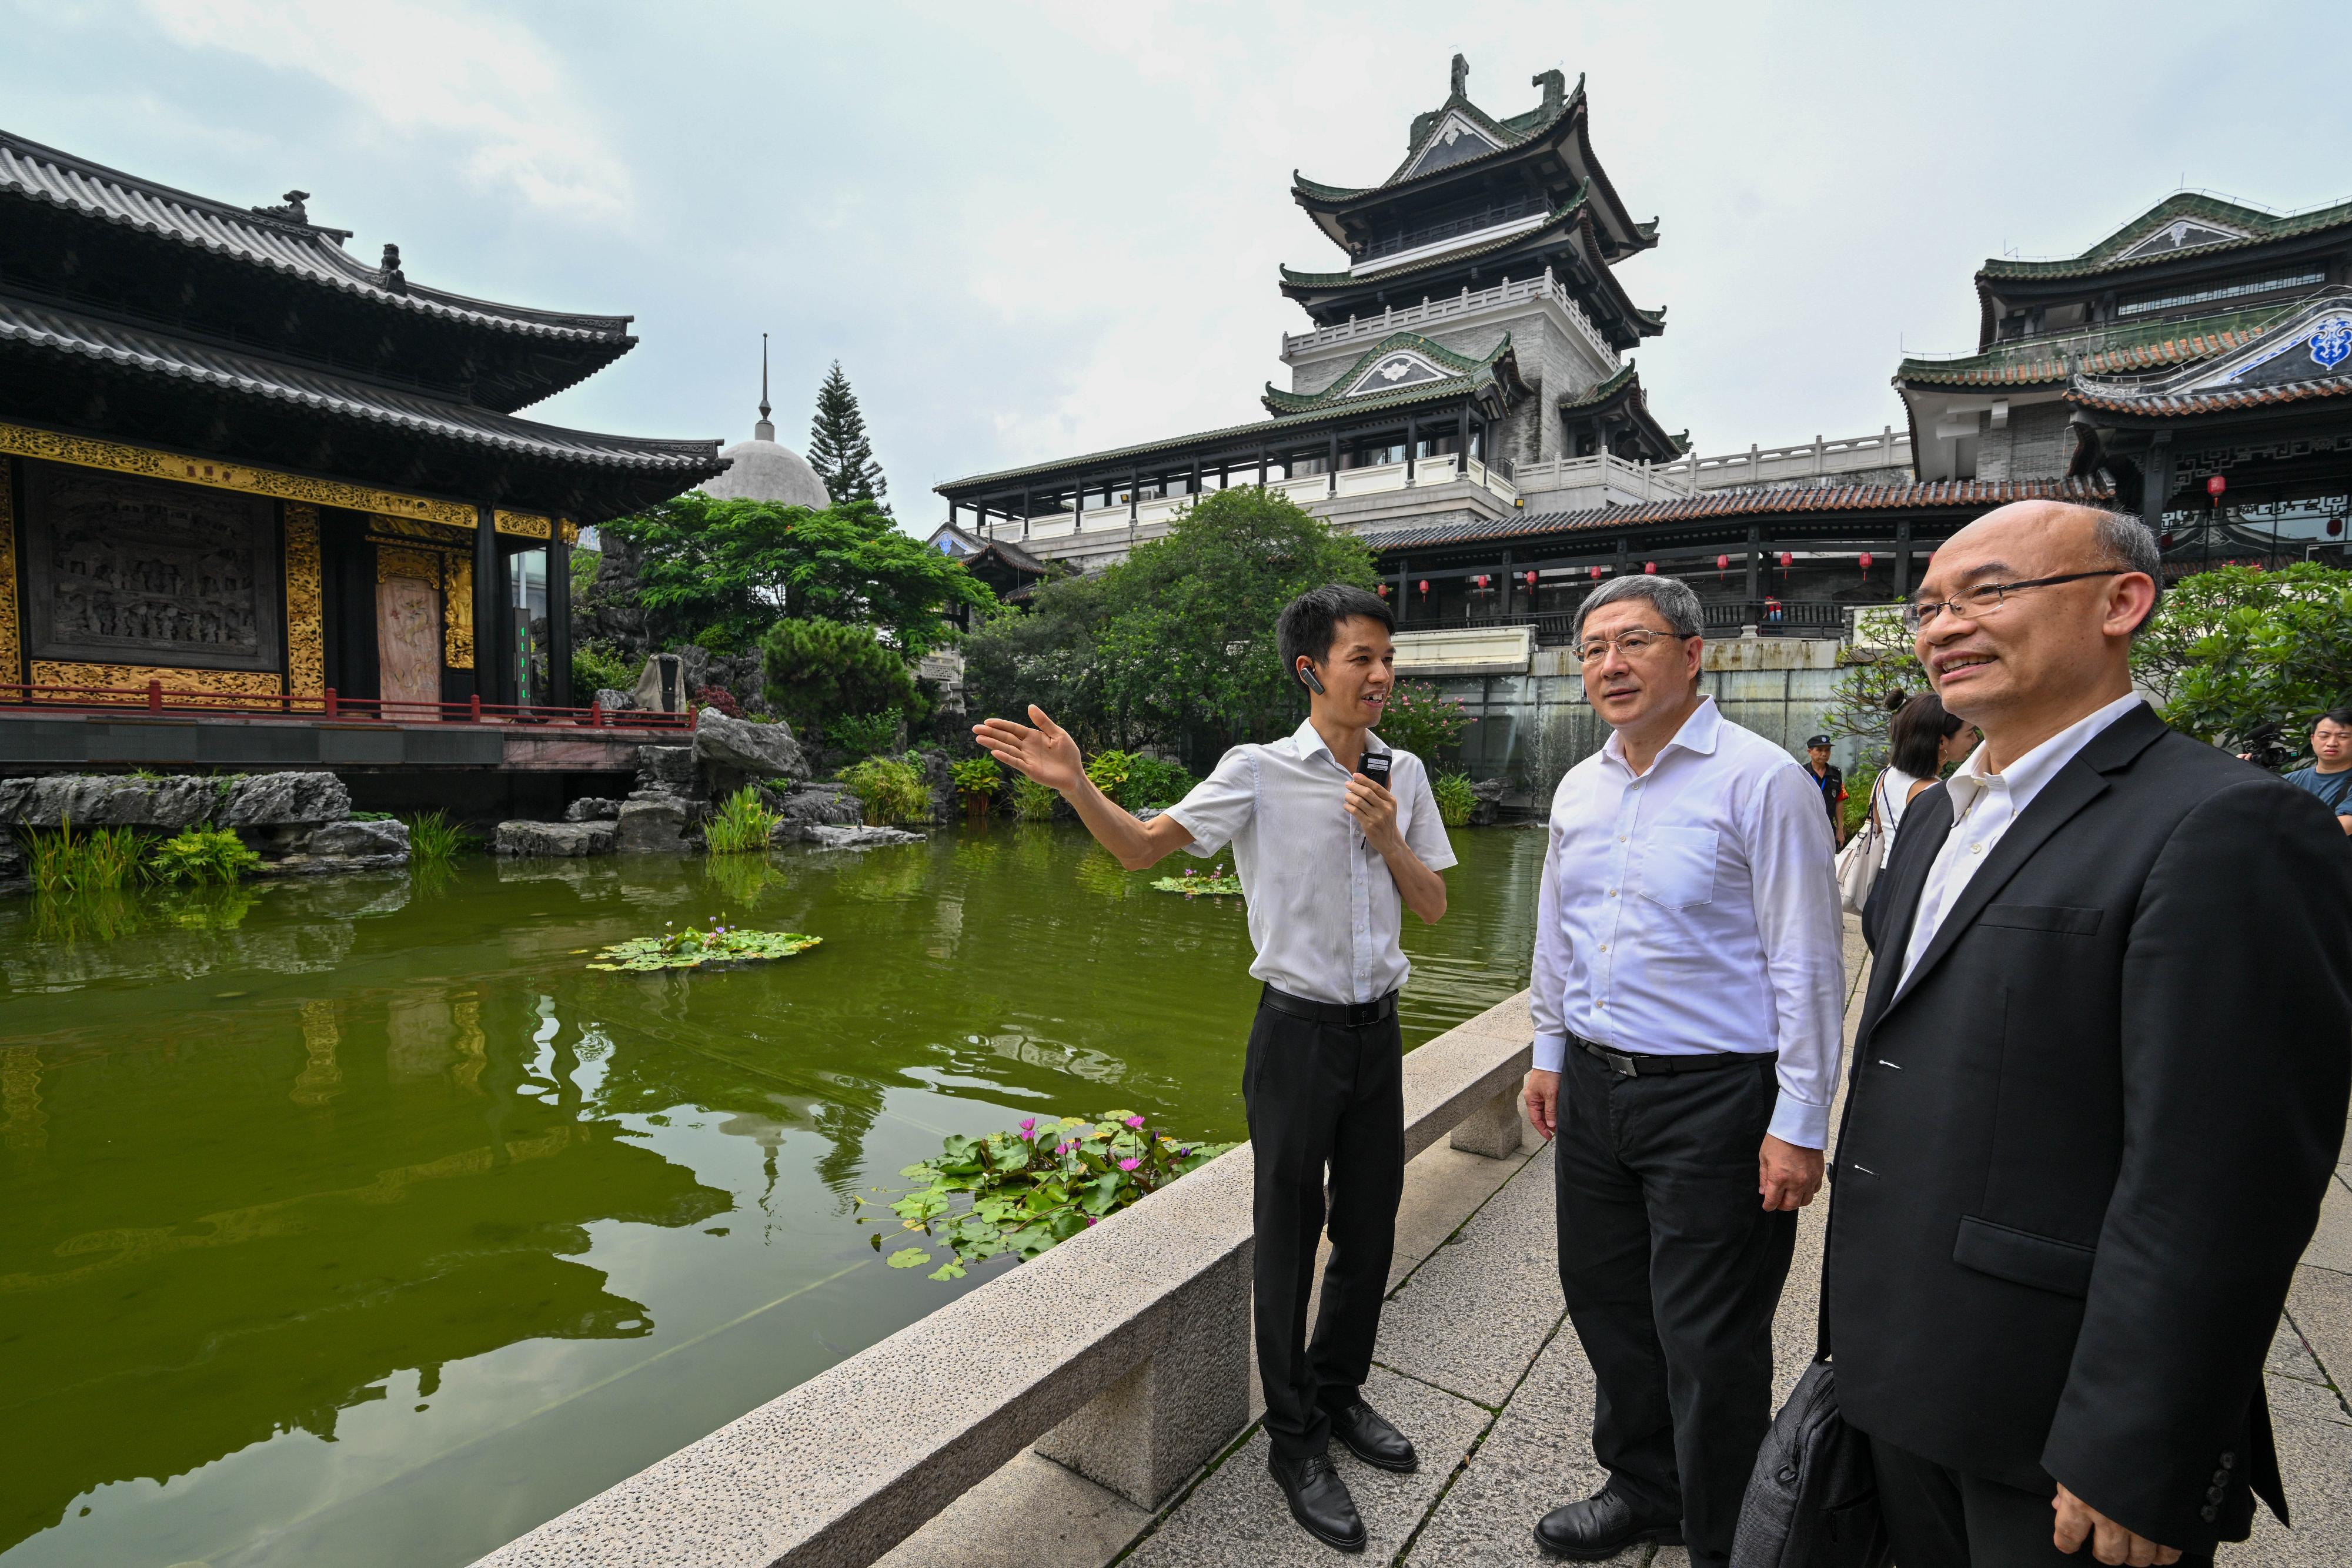 The Deputy Chief Secretary for Administration, Mr Cheuk Wing-hing (centre), visited the Cantonese Opera Art Museum in Guangzhou today (September 13) and received a briefing by museum staff on the development of Cantonese Opera.